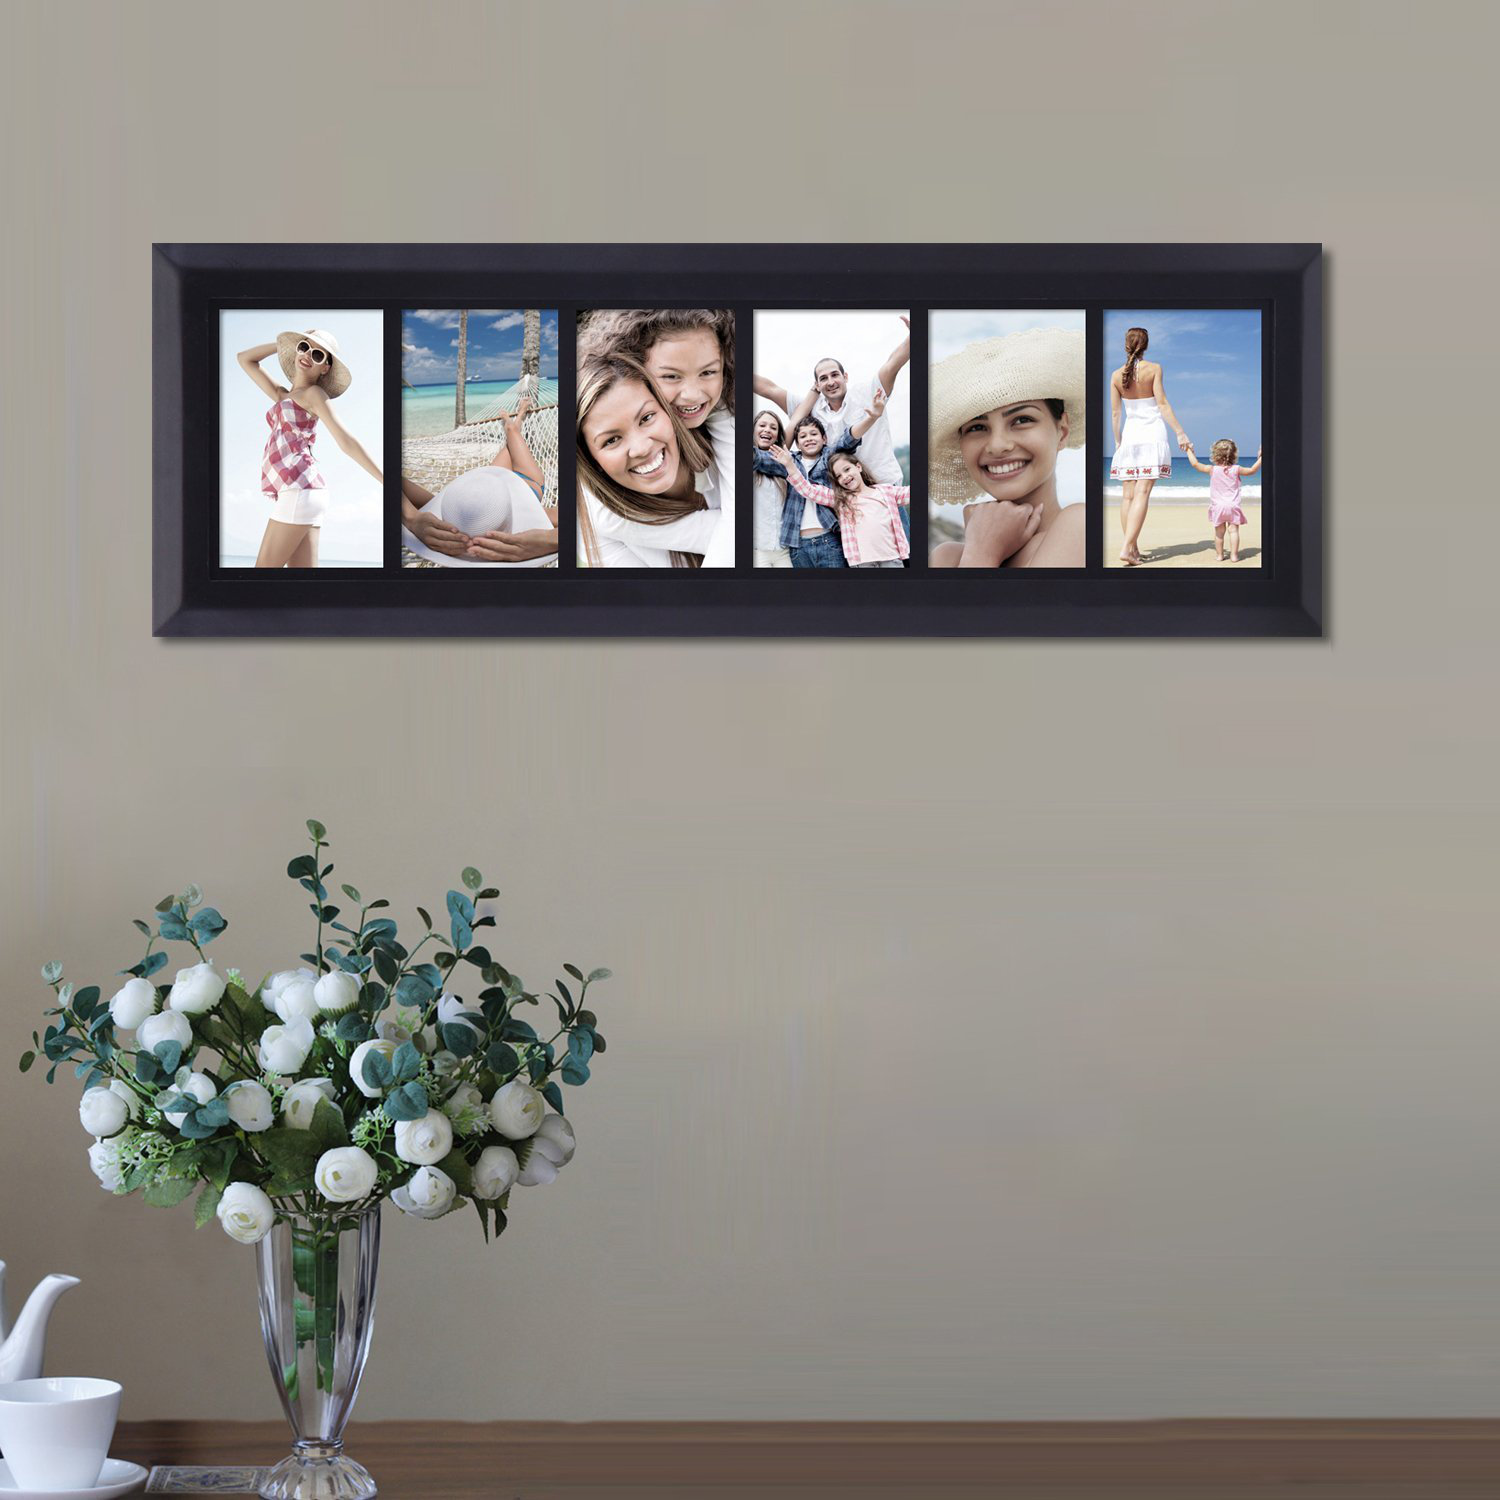 4 by 6 Decorative Black Wood Curved Wall Hanging or Table Top Bevel Photo Frame